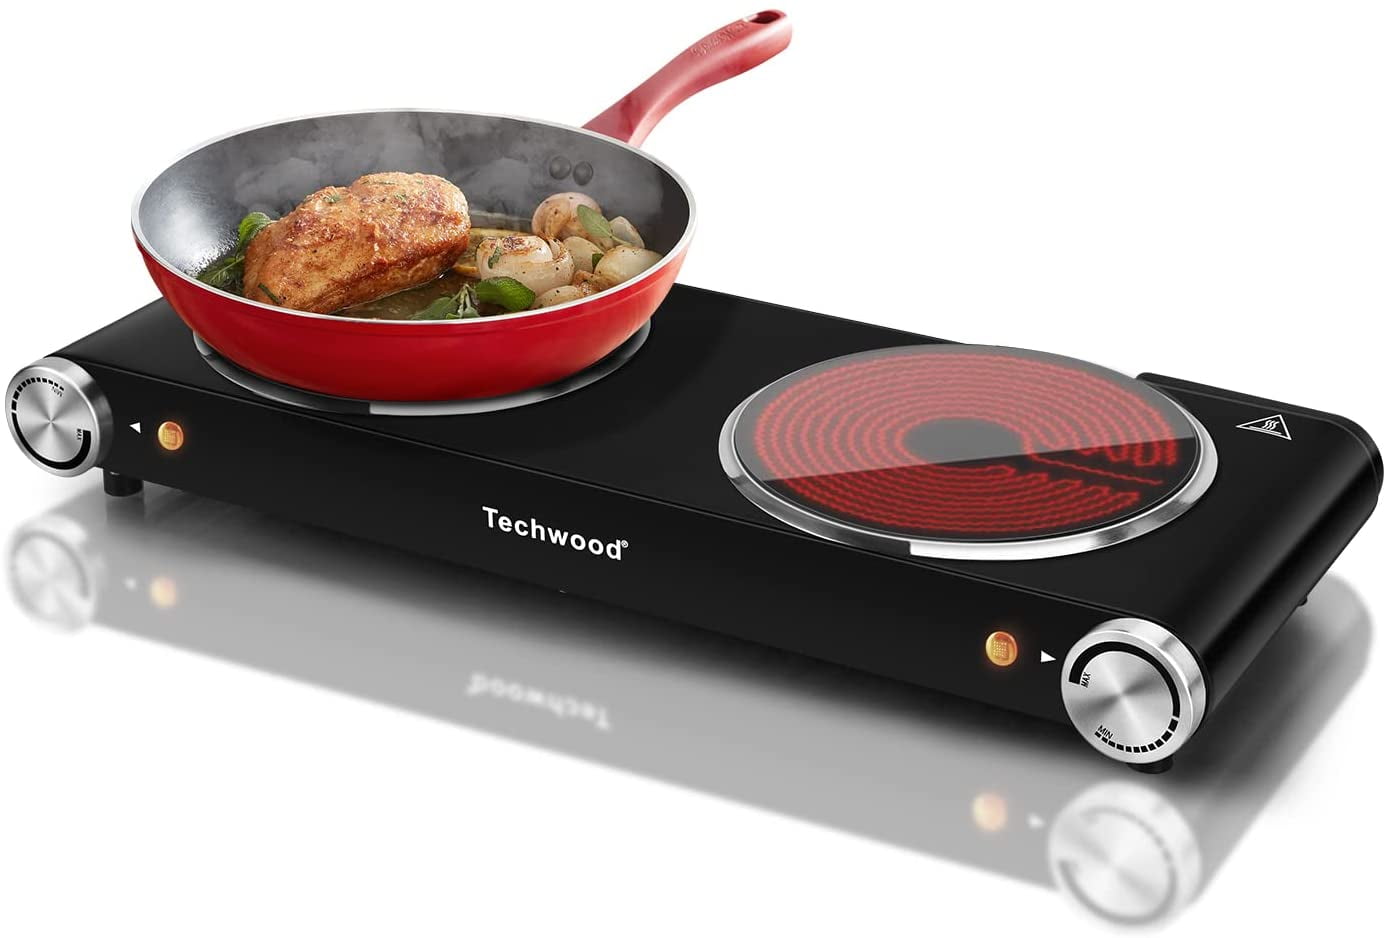 Hot Plate, Techwood 1800W Portable Electric Stove for Cooking Countertop  Dual Burner with Adjustable Temperature & Stay Cool Handles, 7.5” Cooktop  for Home/RV/Camp, Compatible for All Cookware, Red 